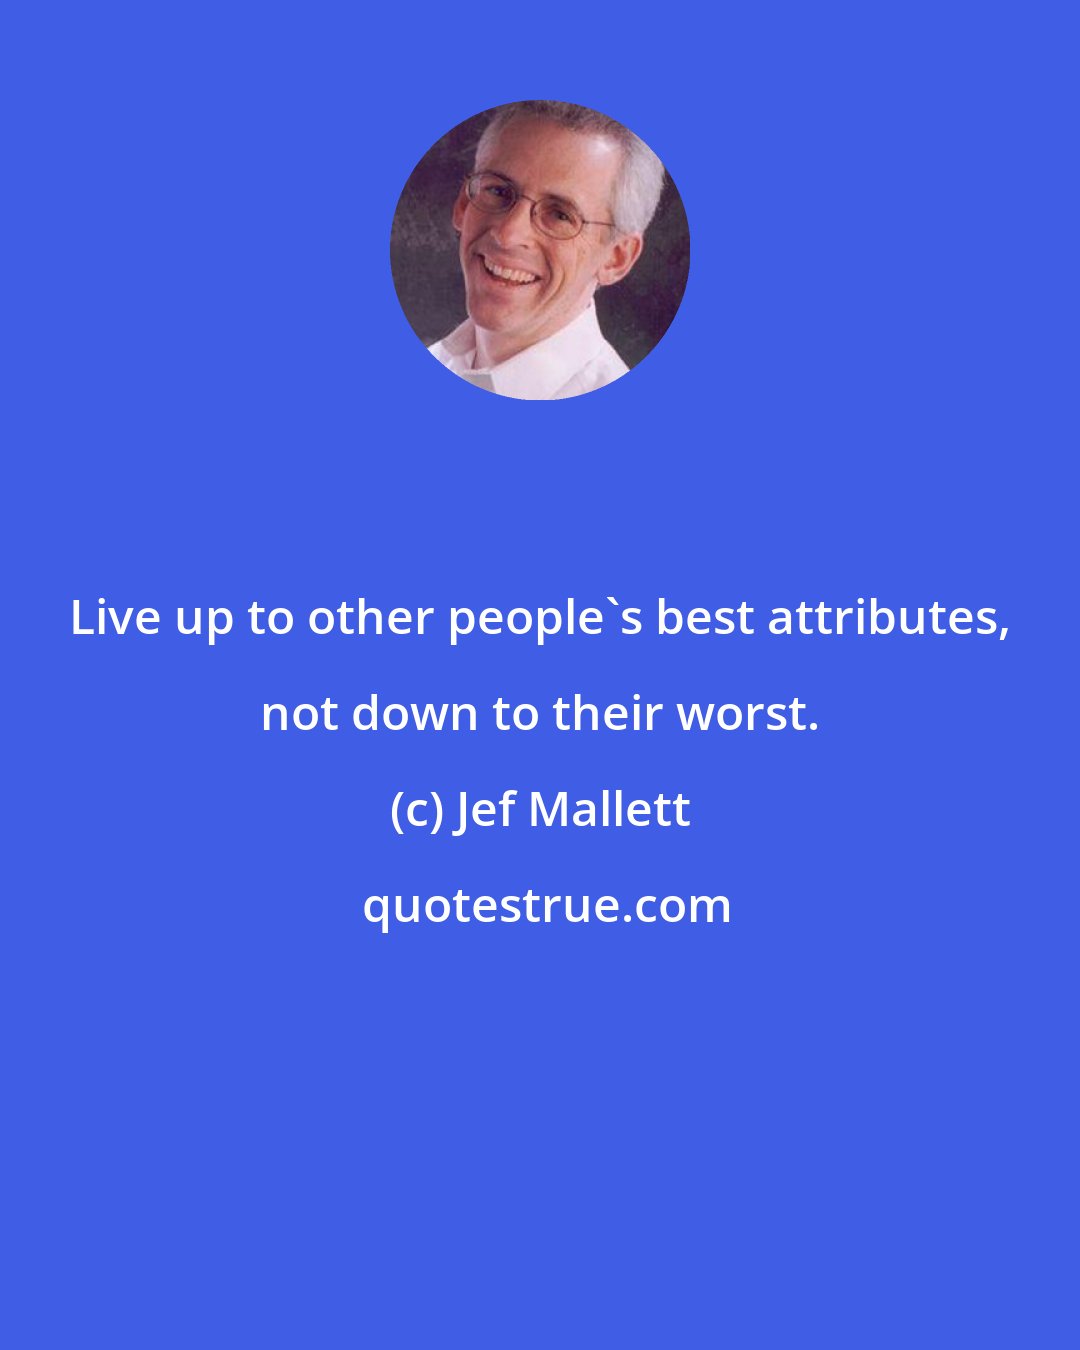 Jef Mallett: Live up to other people's best attributes, not down to their worst.